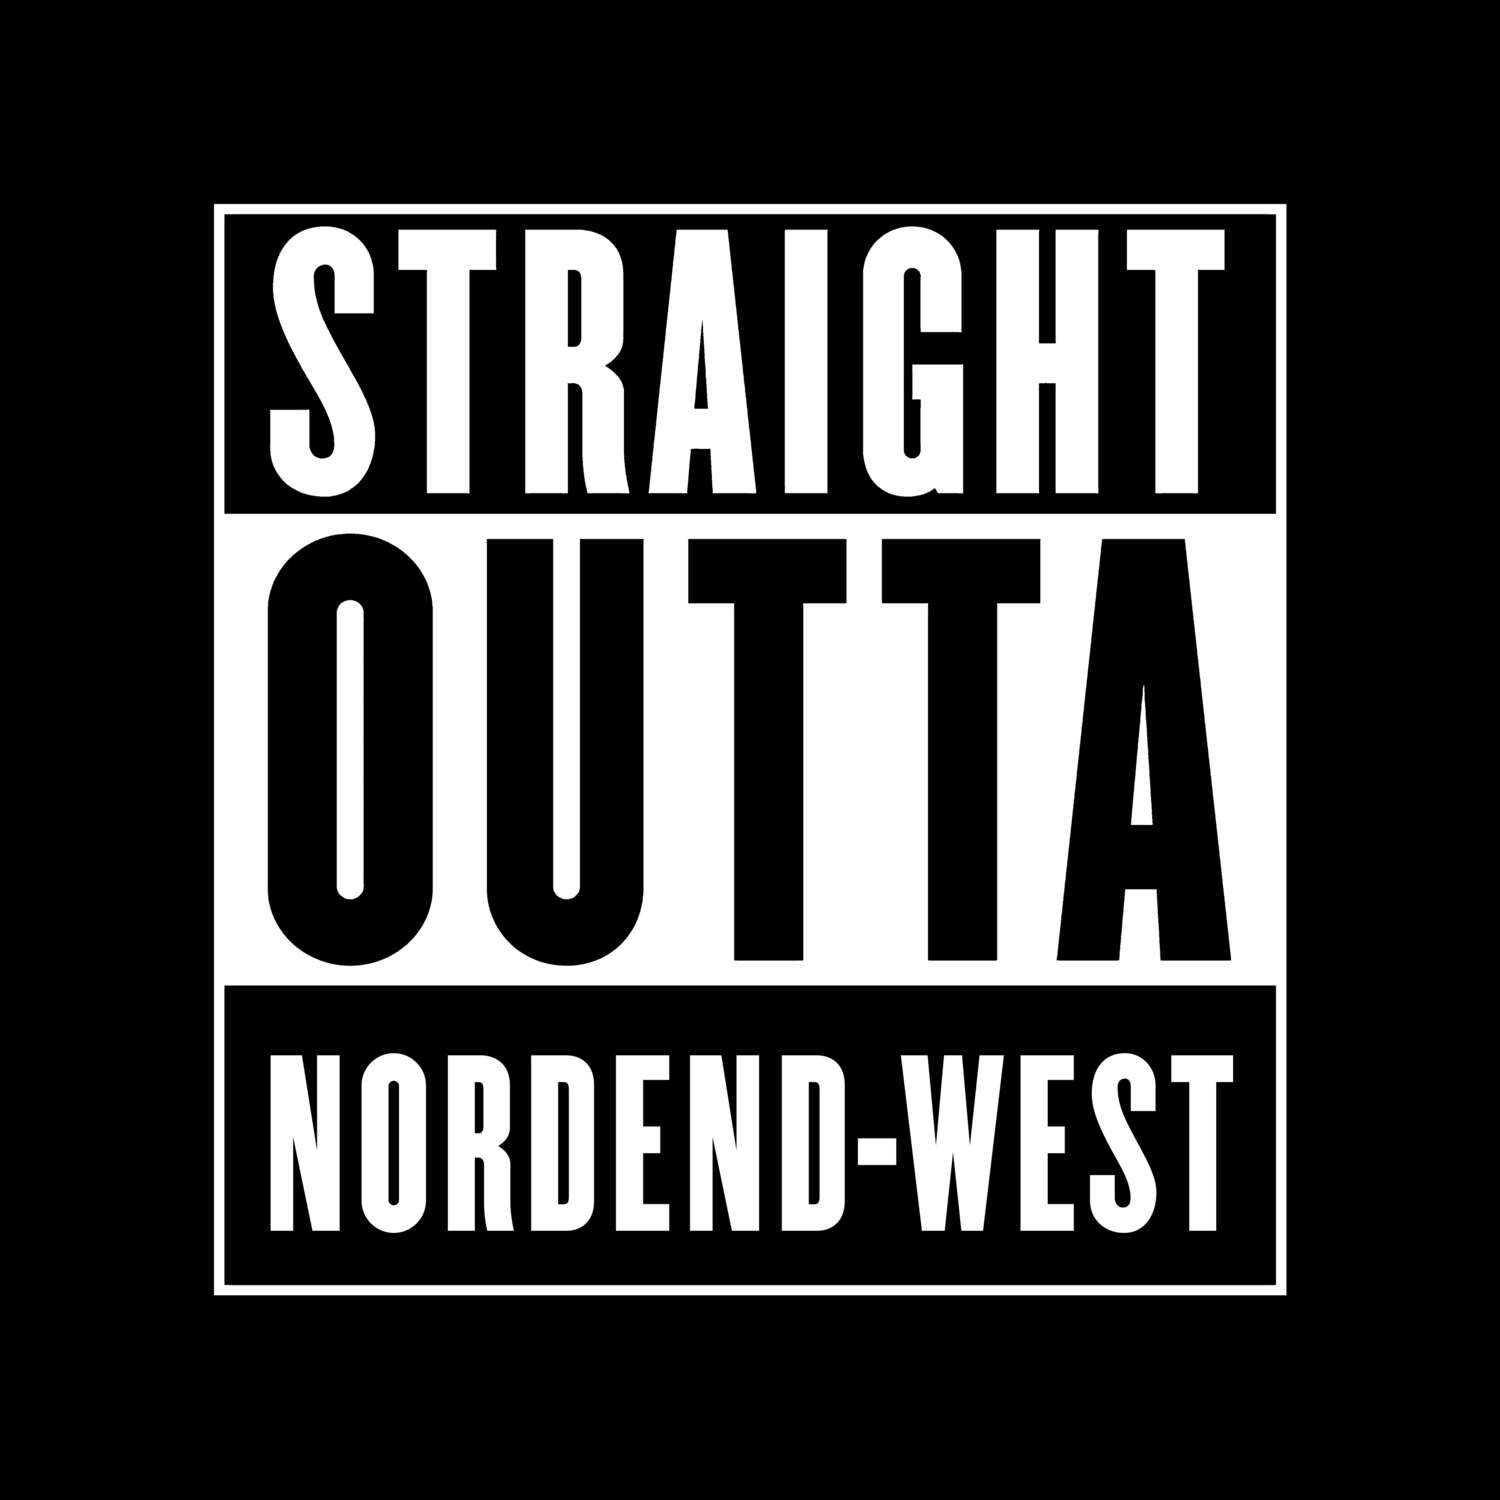 Nordend-West T-Shirt »Straight Outta«